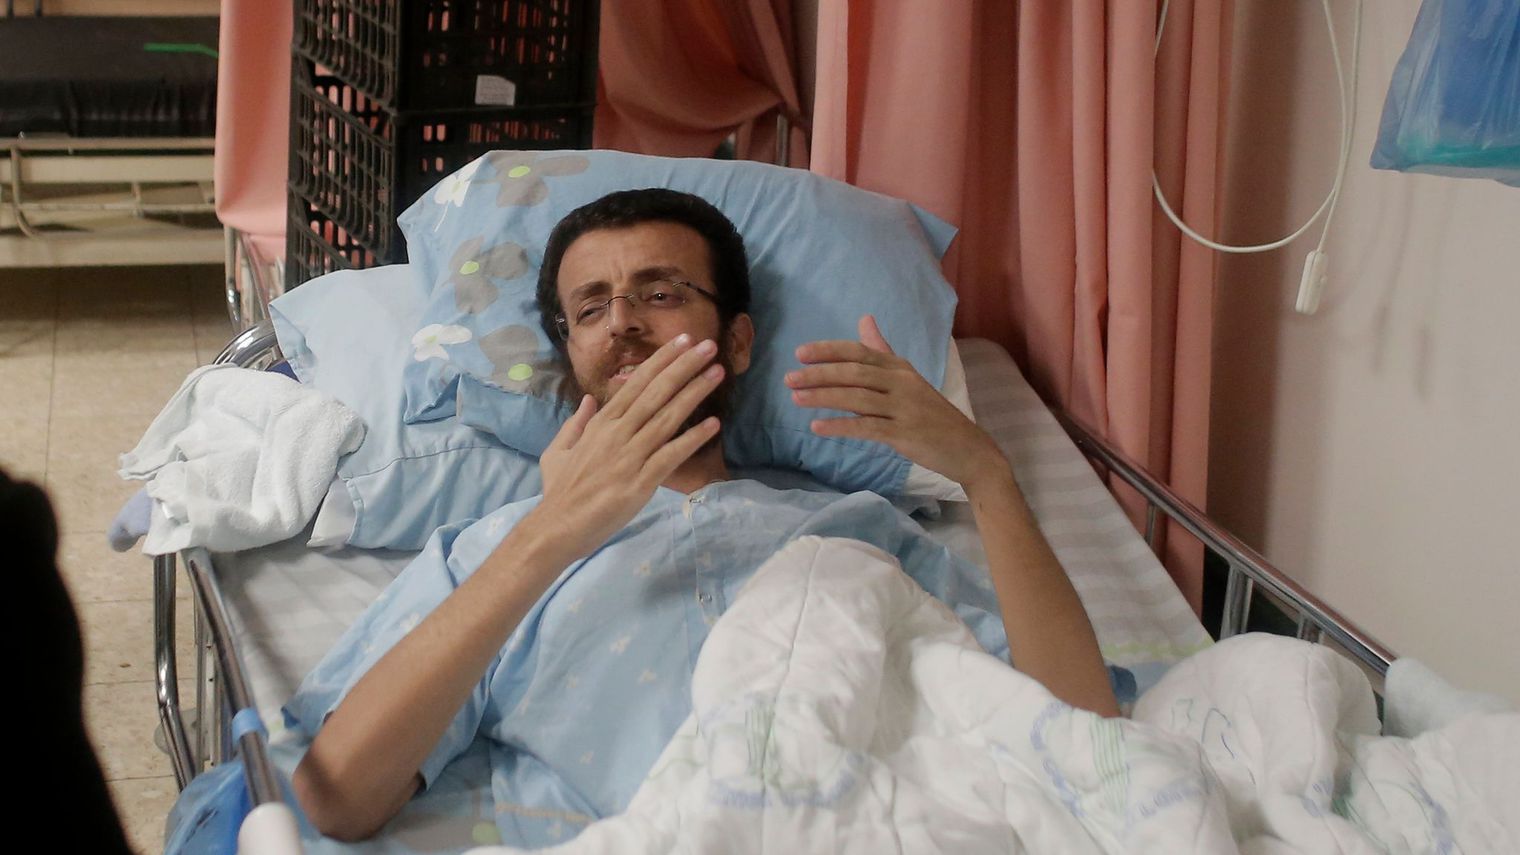 Palestinian Prisoner Al-Qiq Ends Hunger Strike, to Be Freed in May